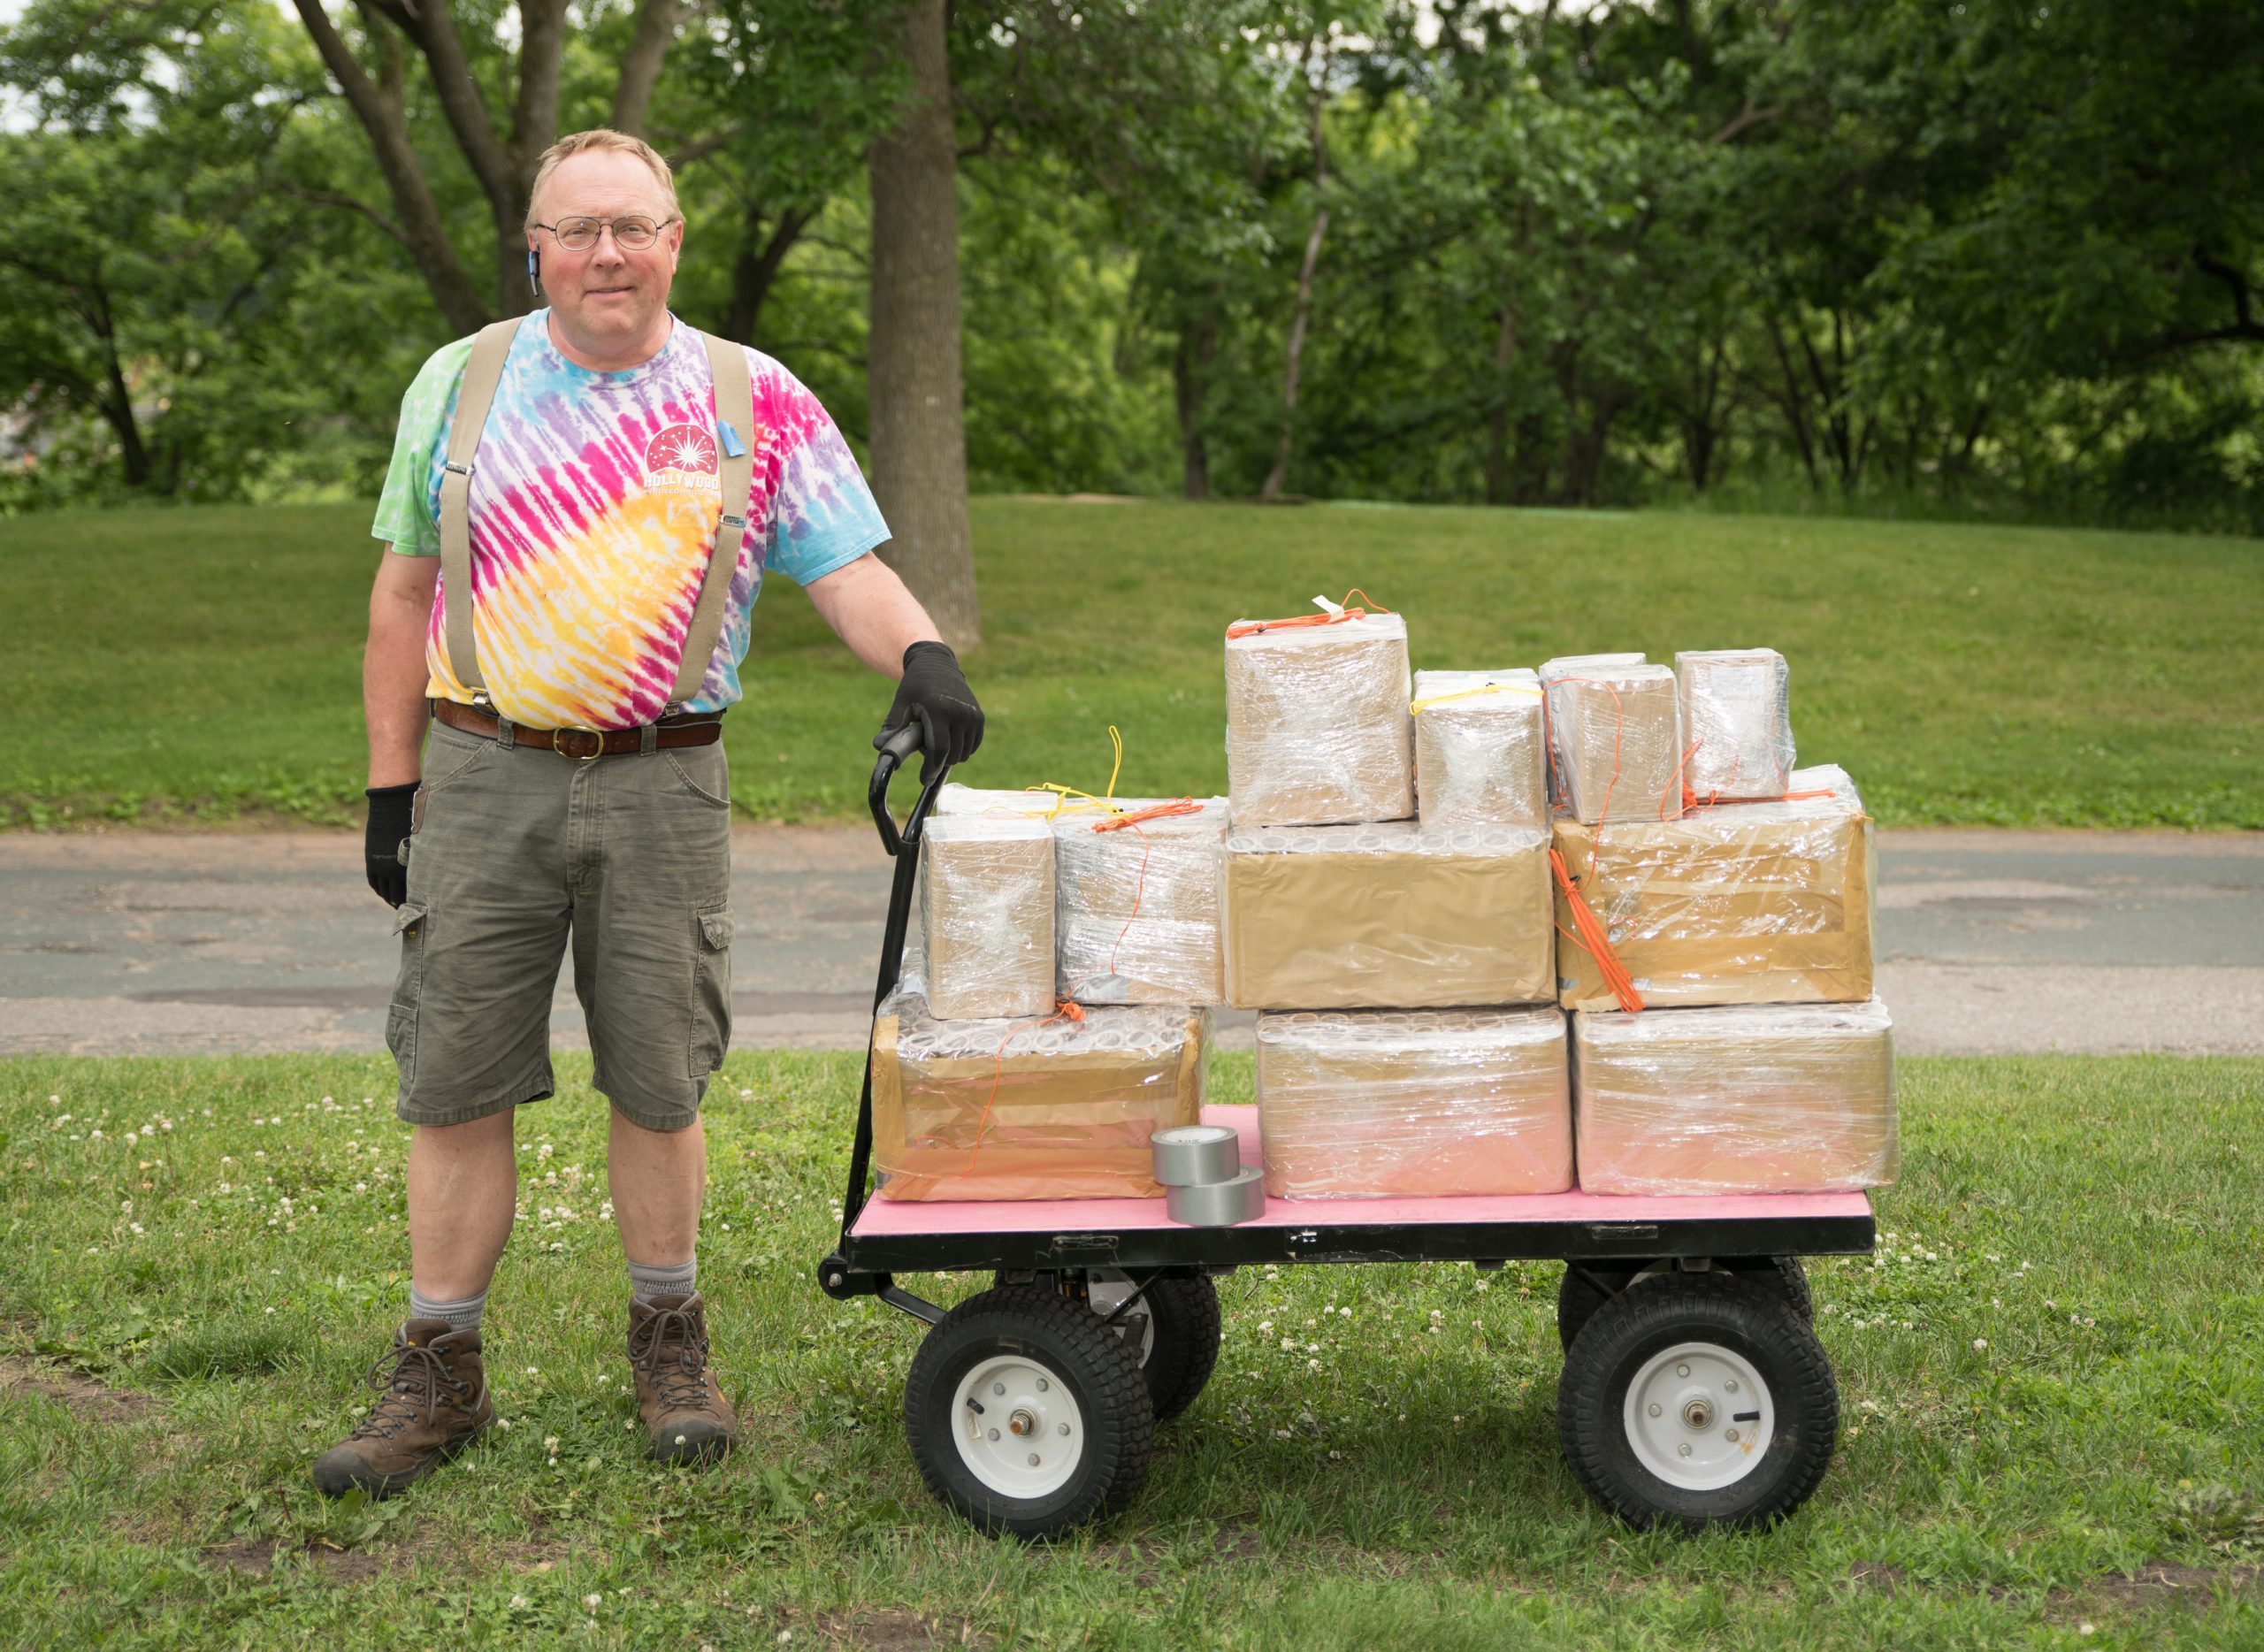 Bert Rowe and a cart full of fireworks